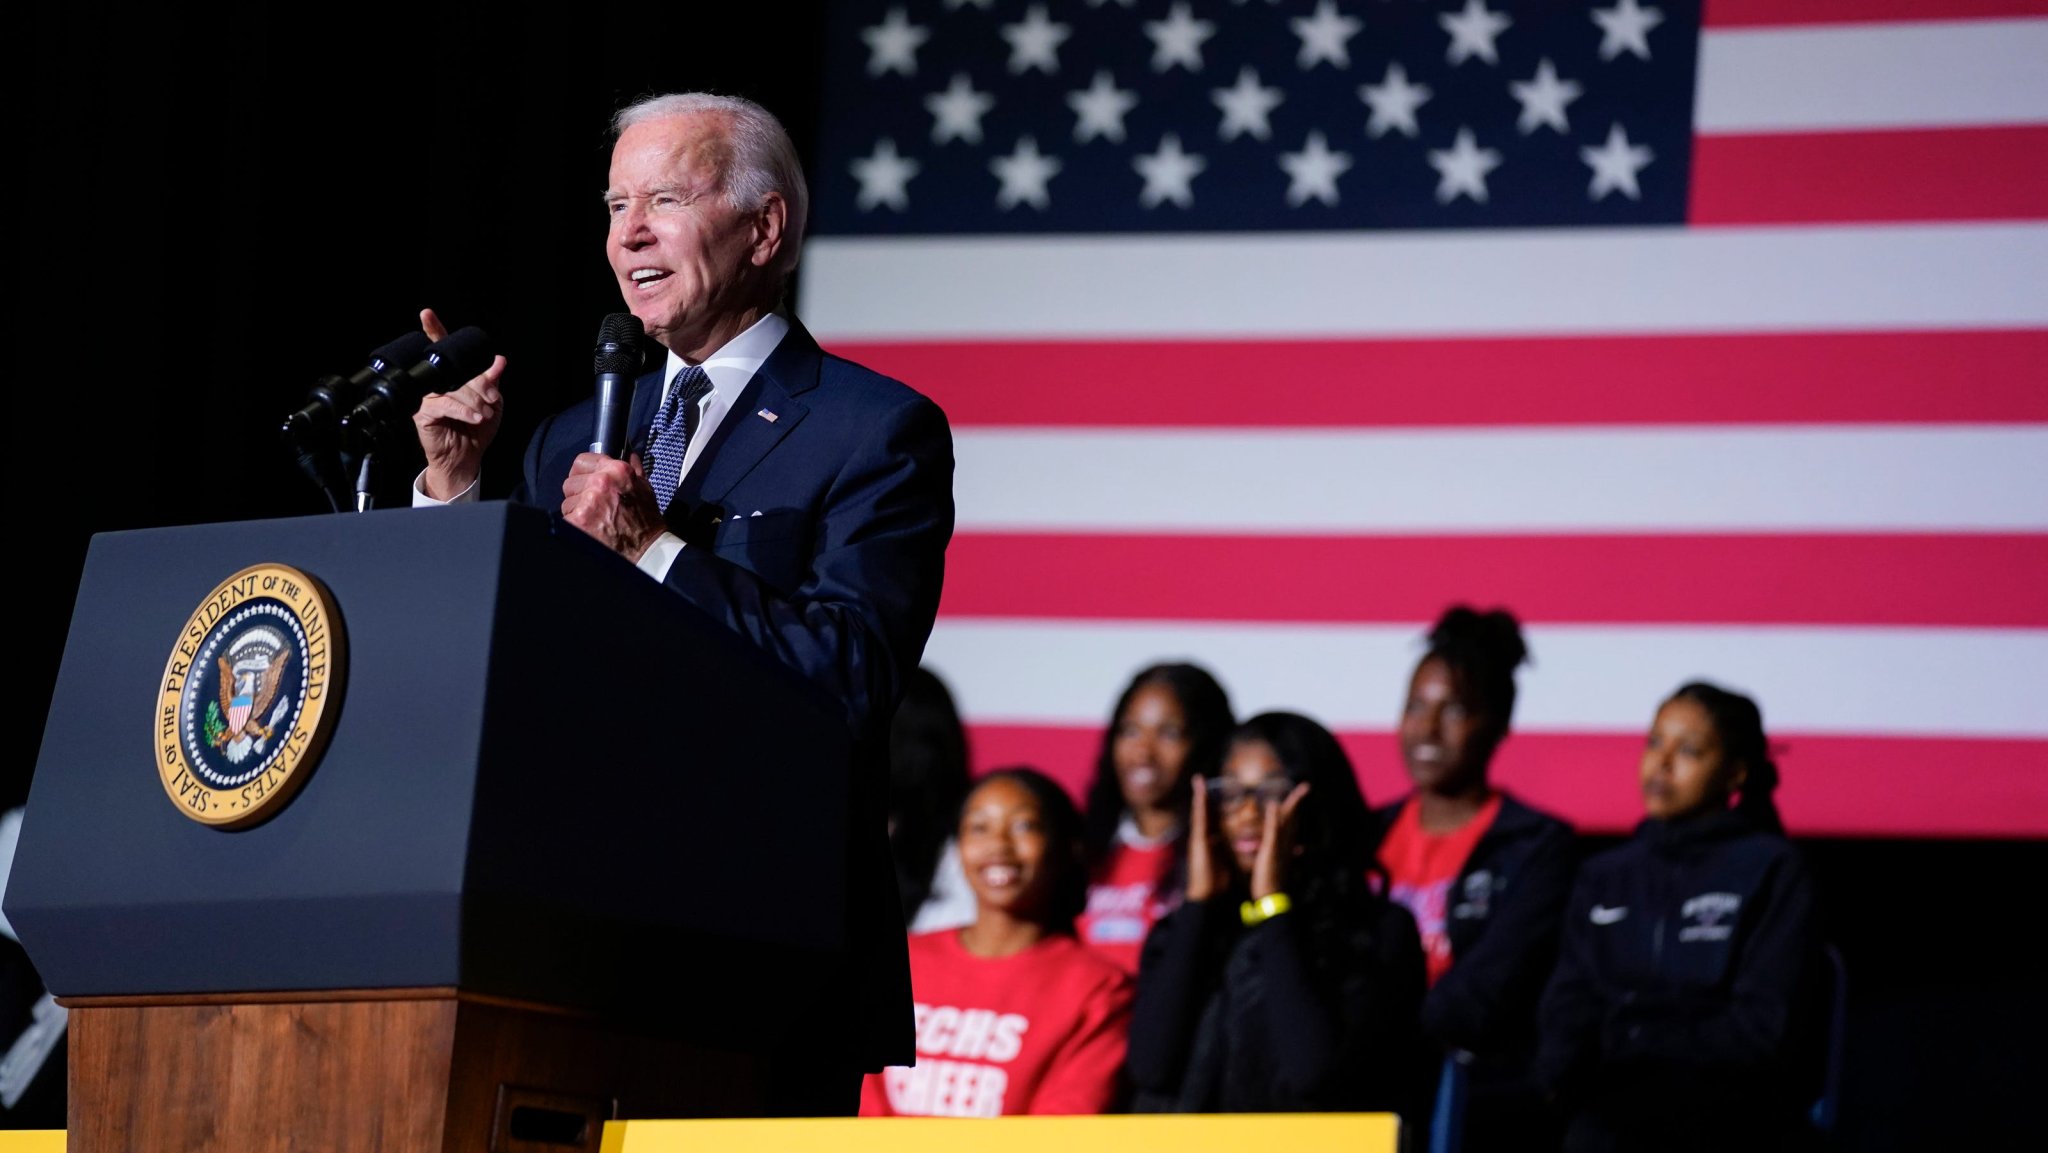 Acting before Supreme Court ruling, House votes to block Biden's student loan forgiveness plan